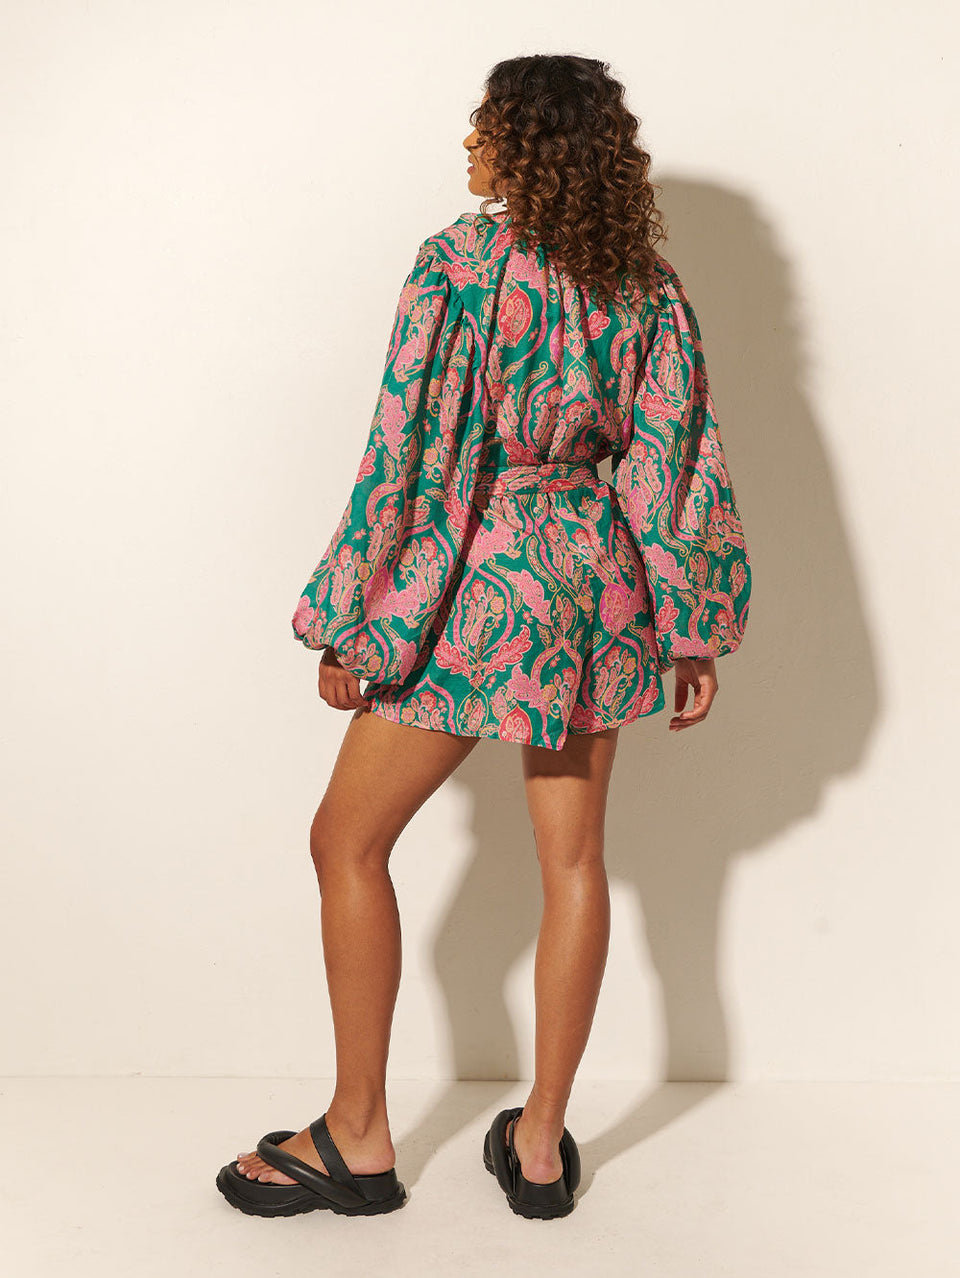 KIVARI Talitha Playsuit | Model wears Green and Pink Playsuit Back View